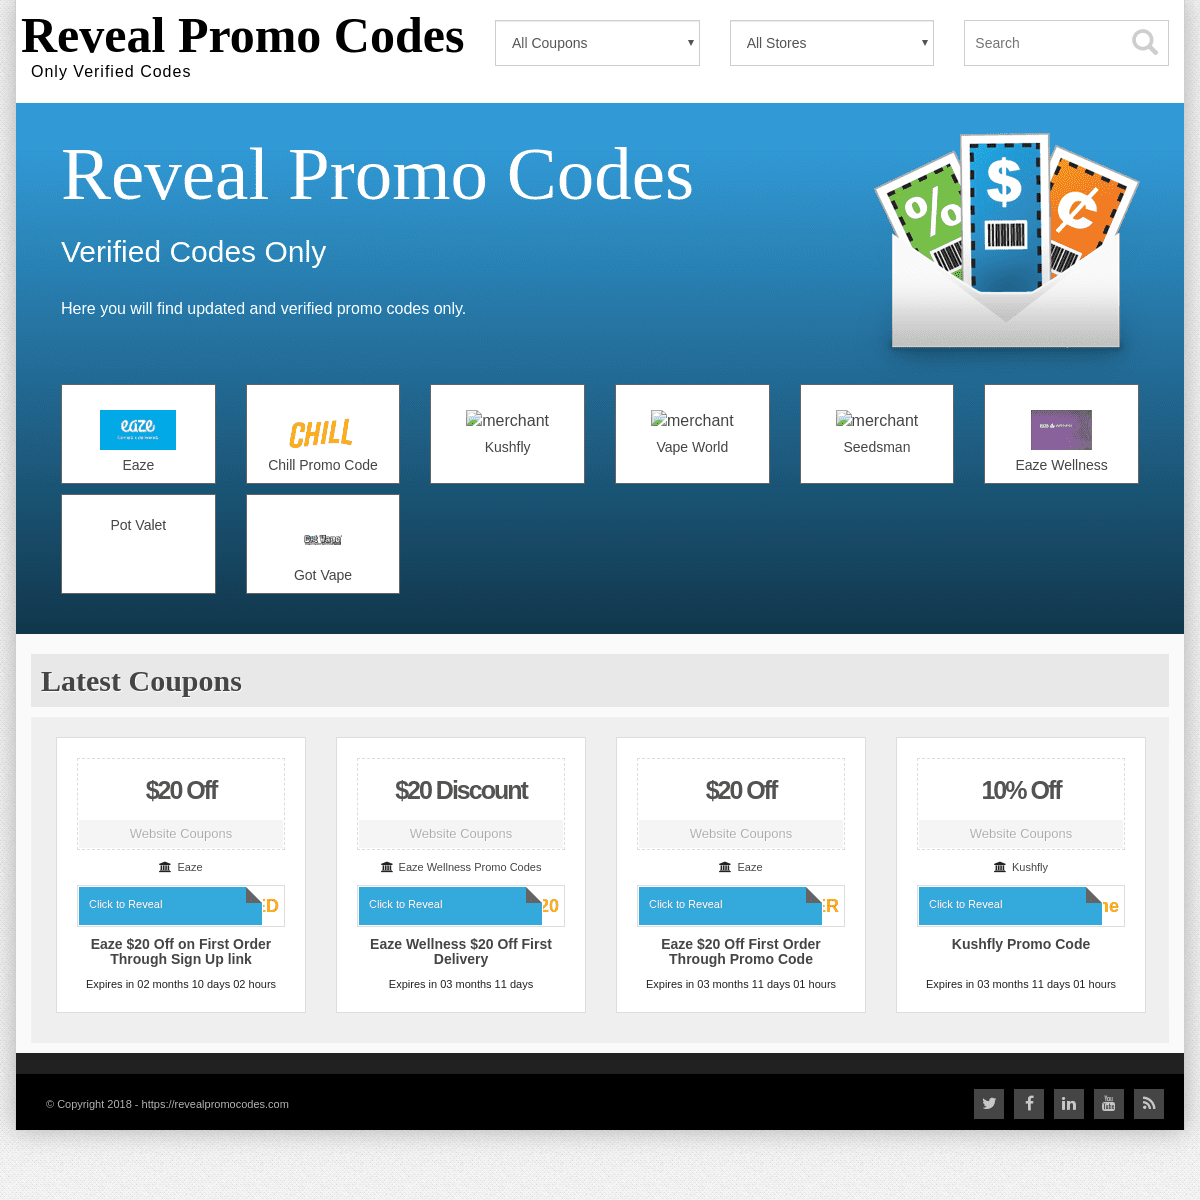 Reveal Promo Codes - Verified Codes Reveal Promo Codes